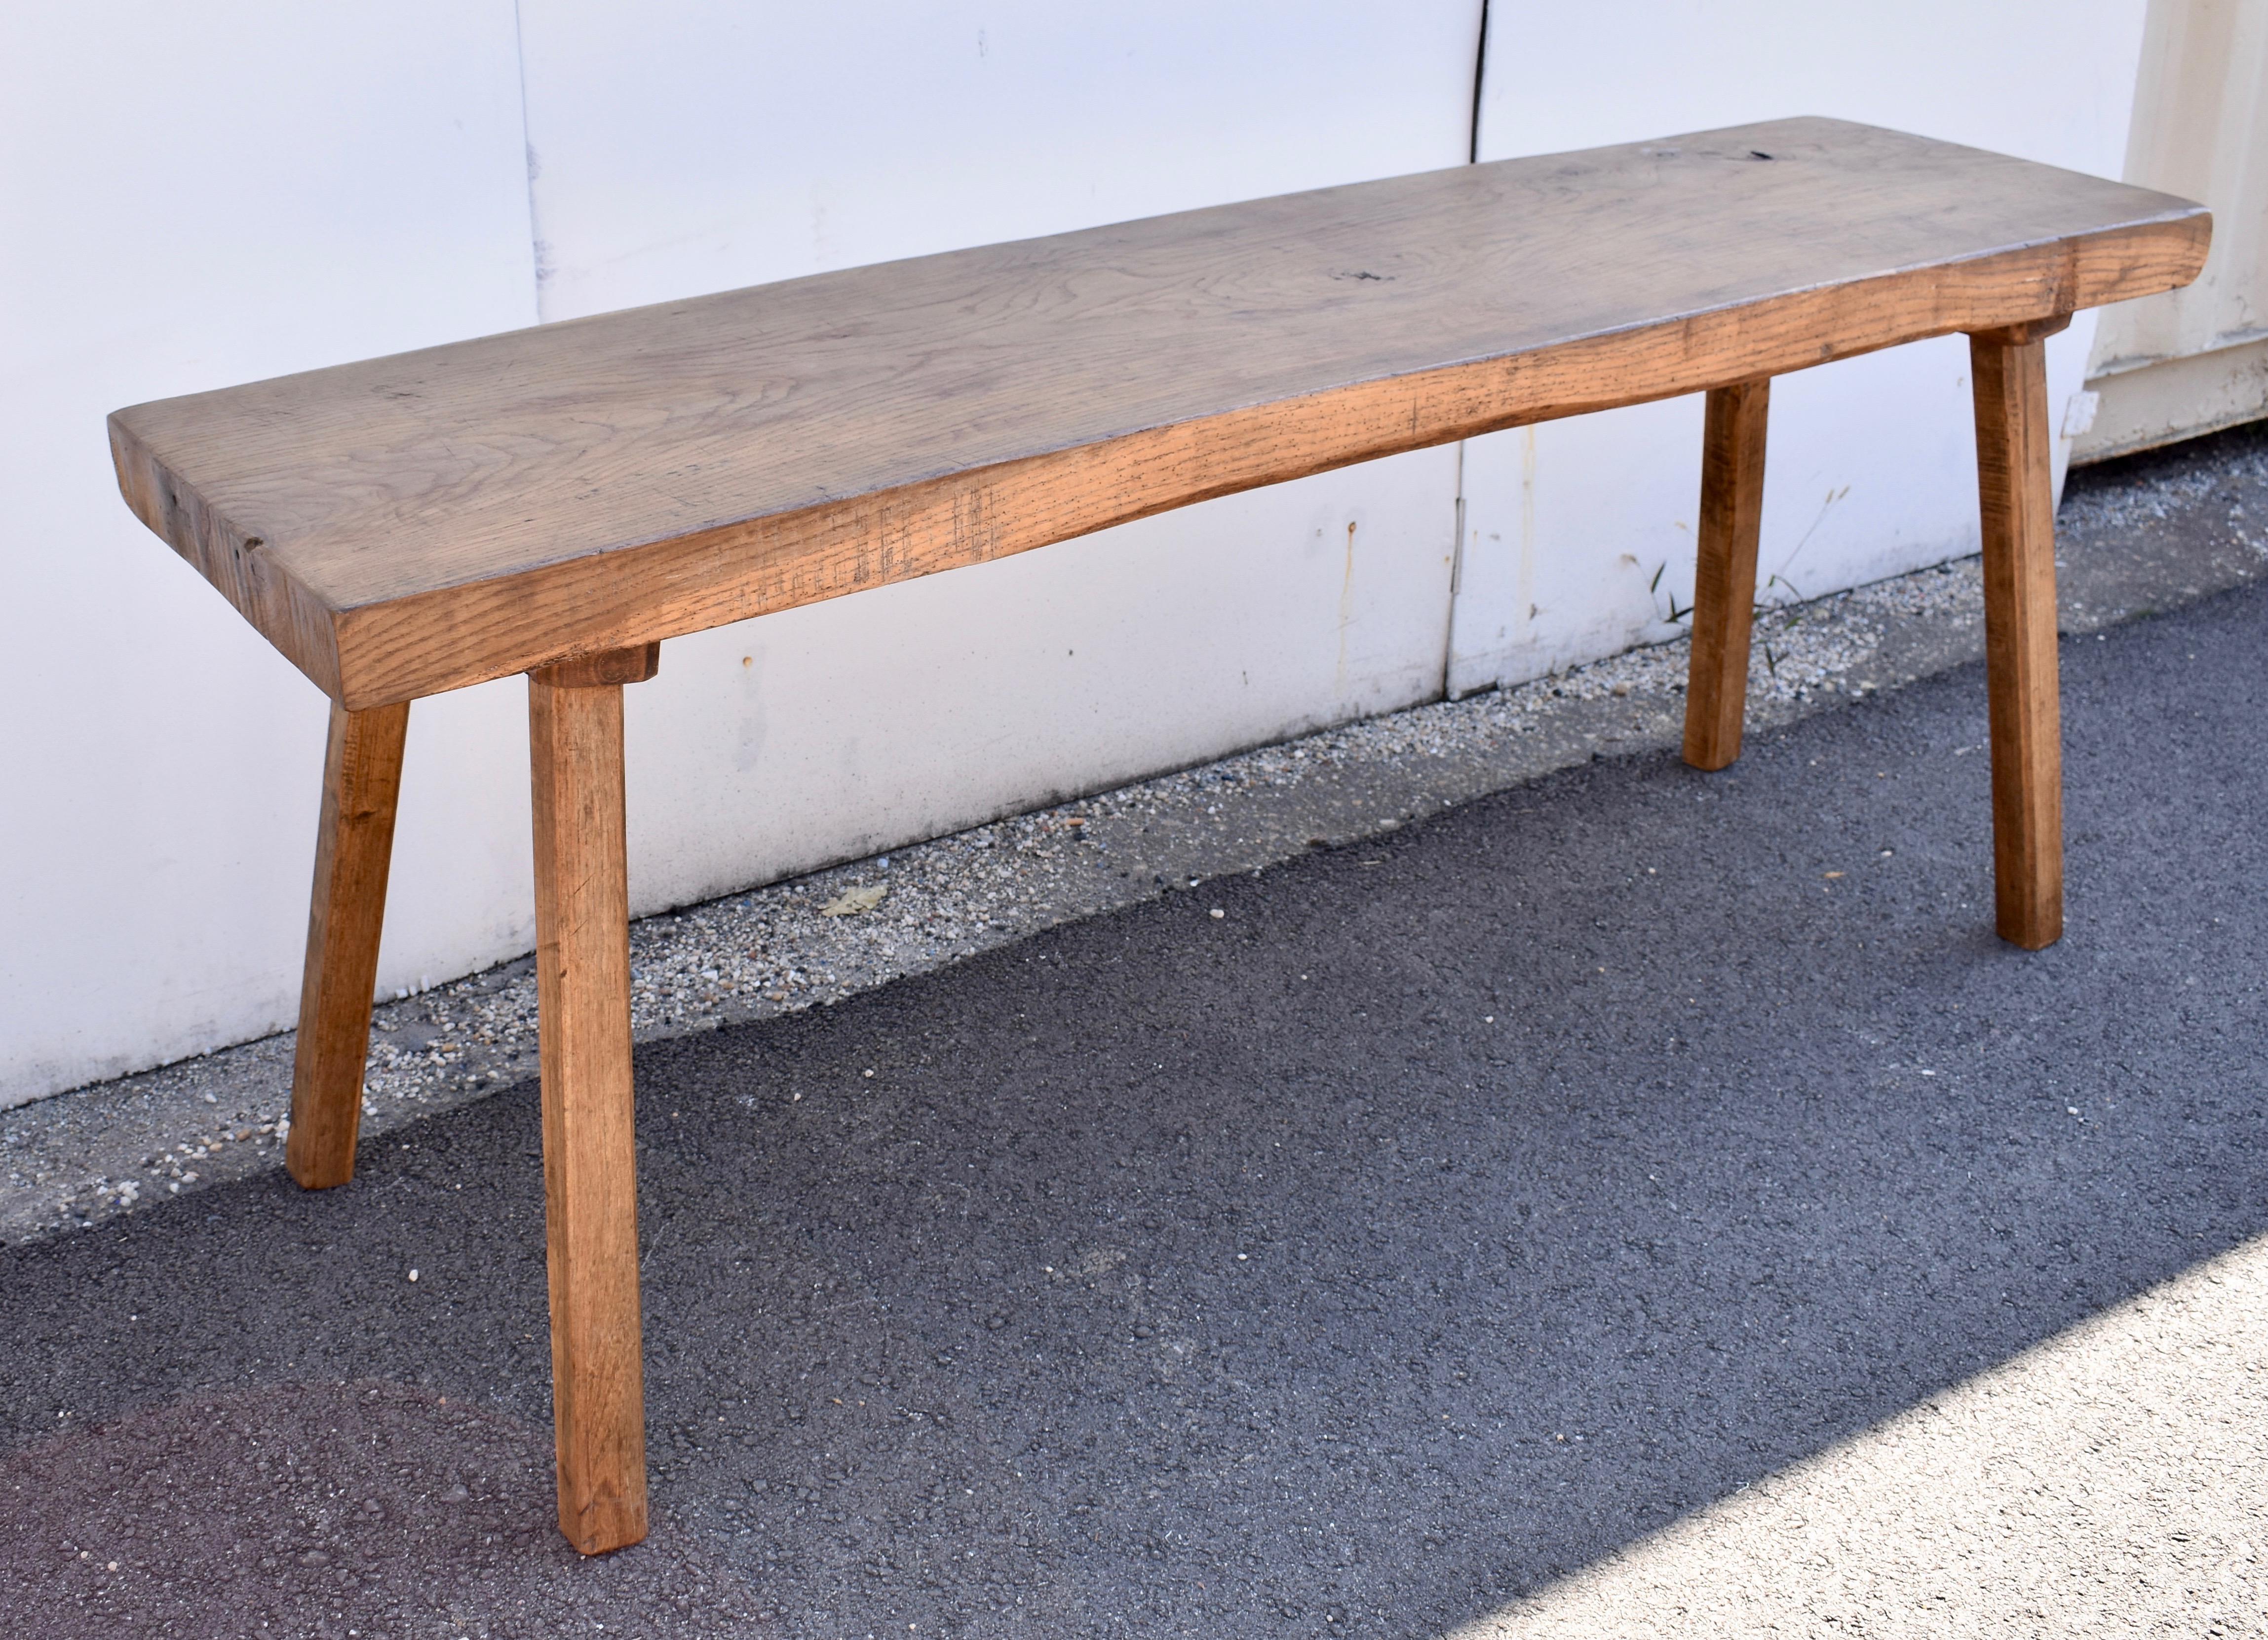 Country Oak Pig Bench Butcher's Block Table